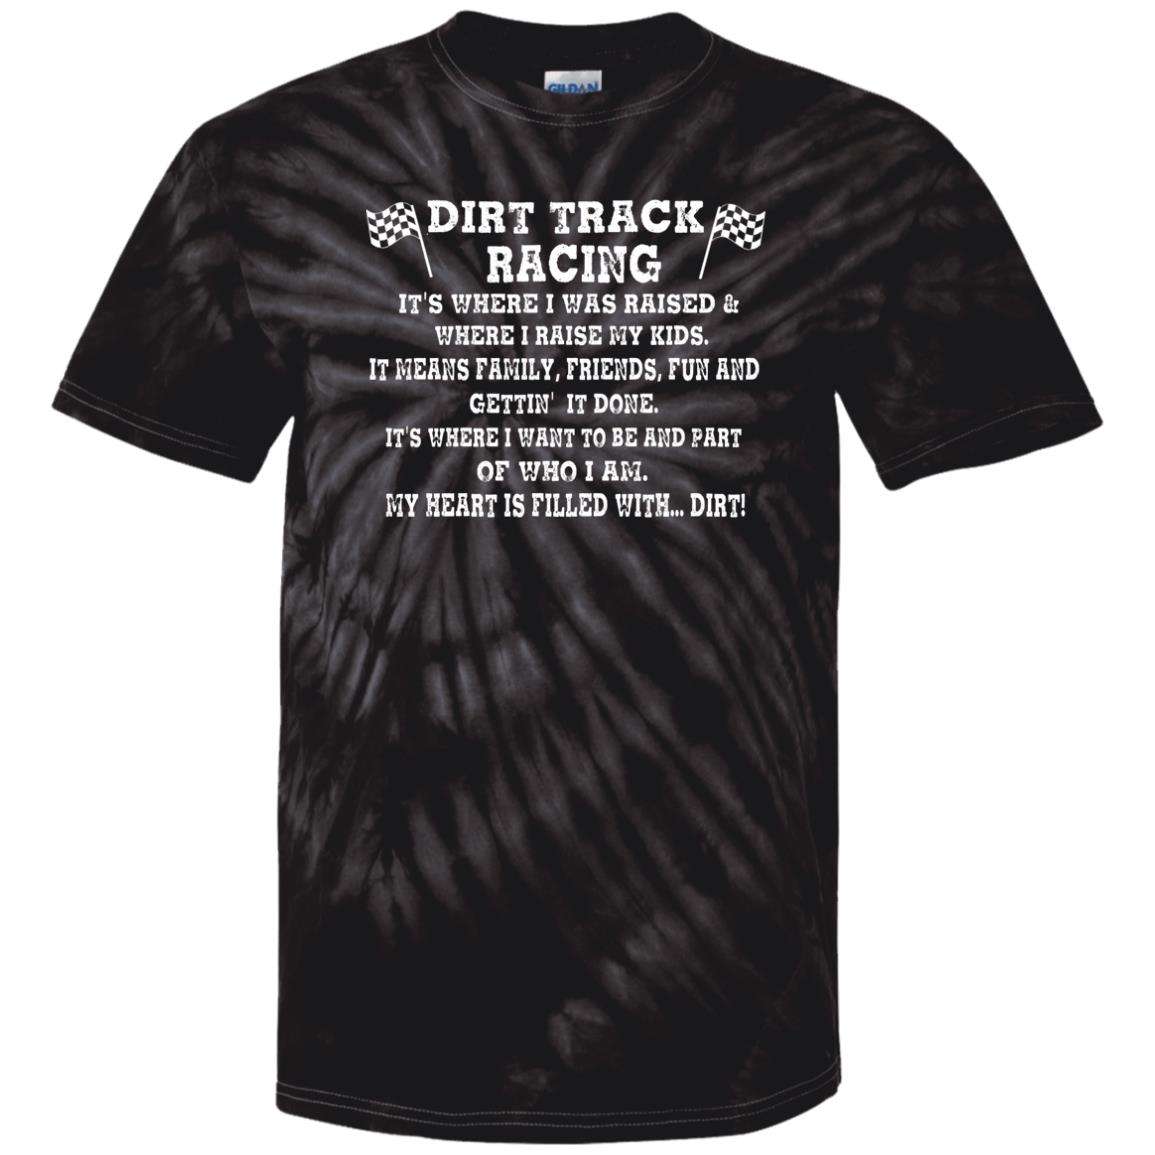 Dirt Track Racing It's Where I Was Raised 100% Cotton Tie Dye T-Shirt